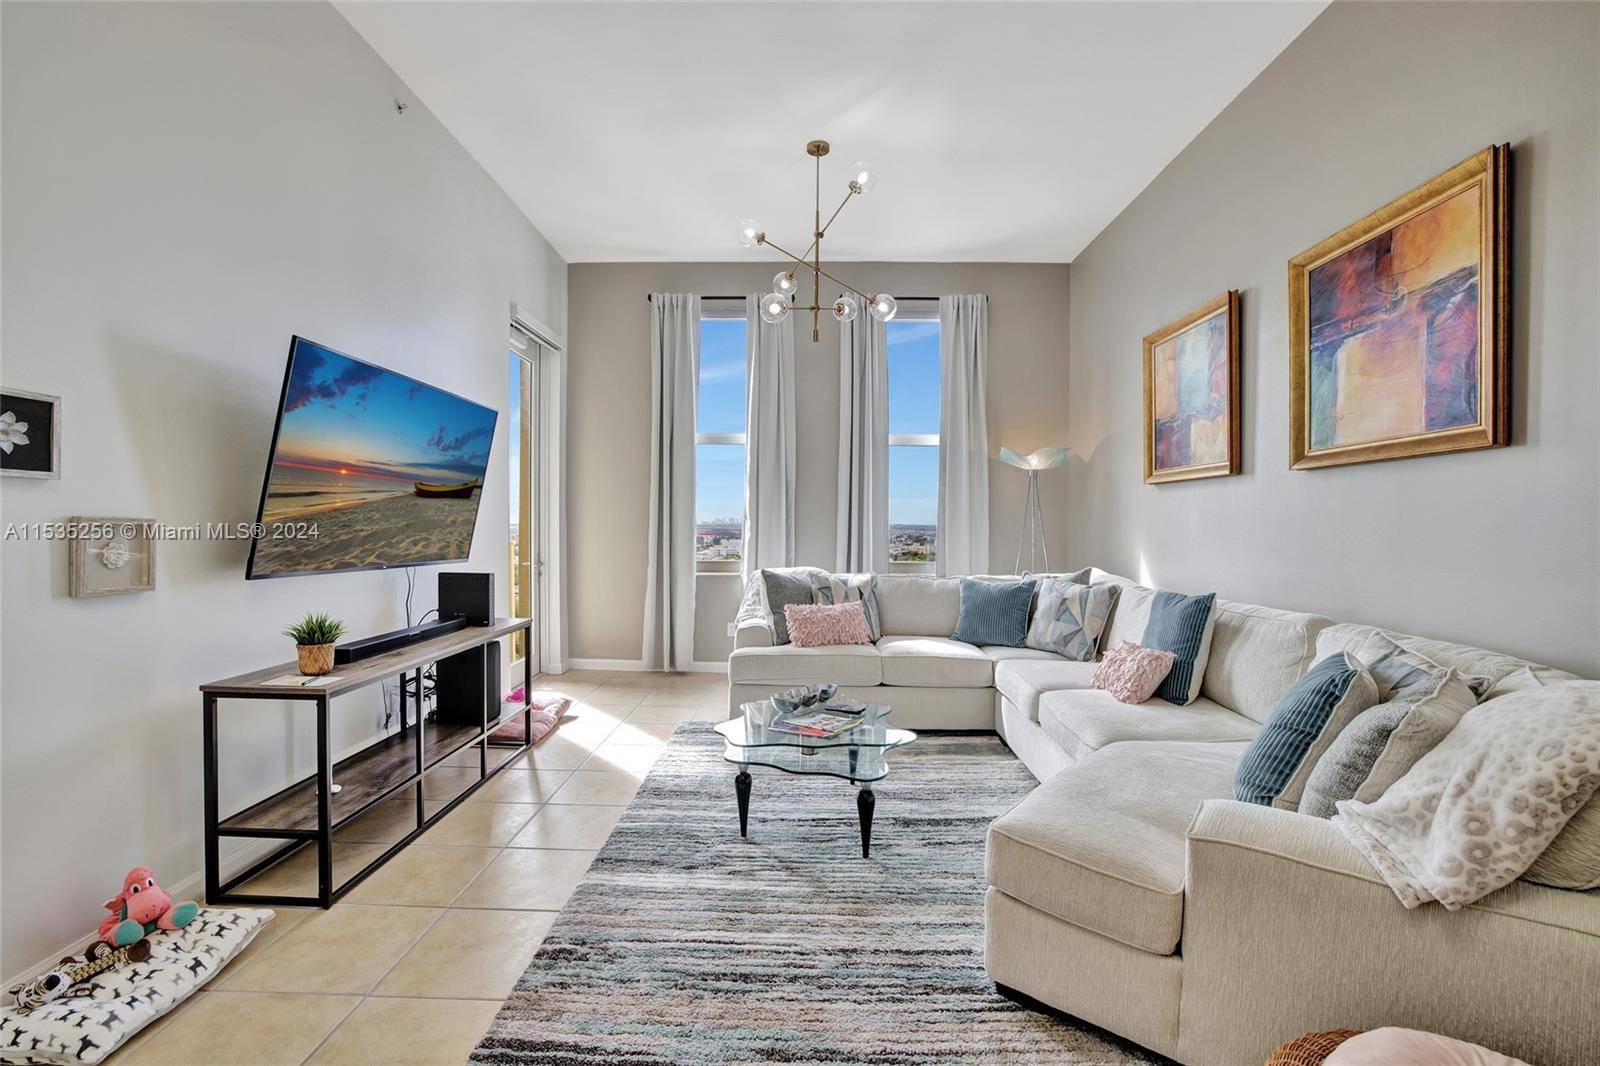 One of a kind True Penthouse w 11 foot ceilings, Panoramic Southern Views of the City Ocean.